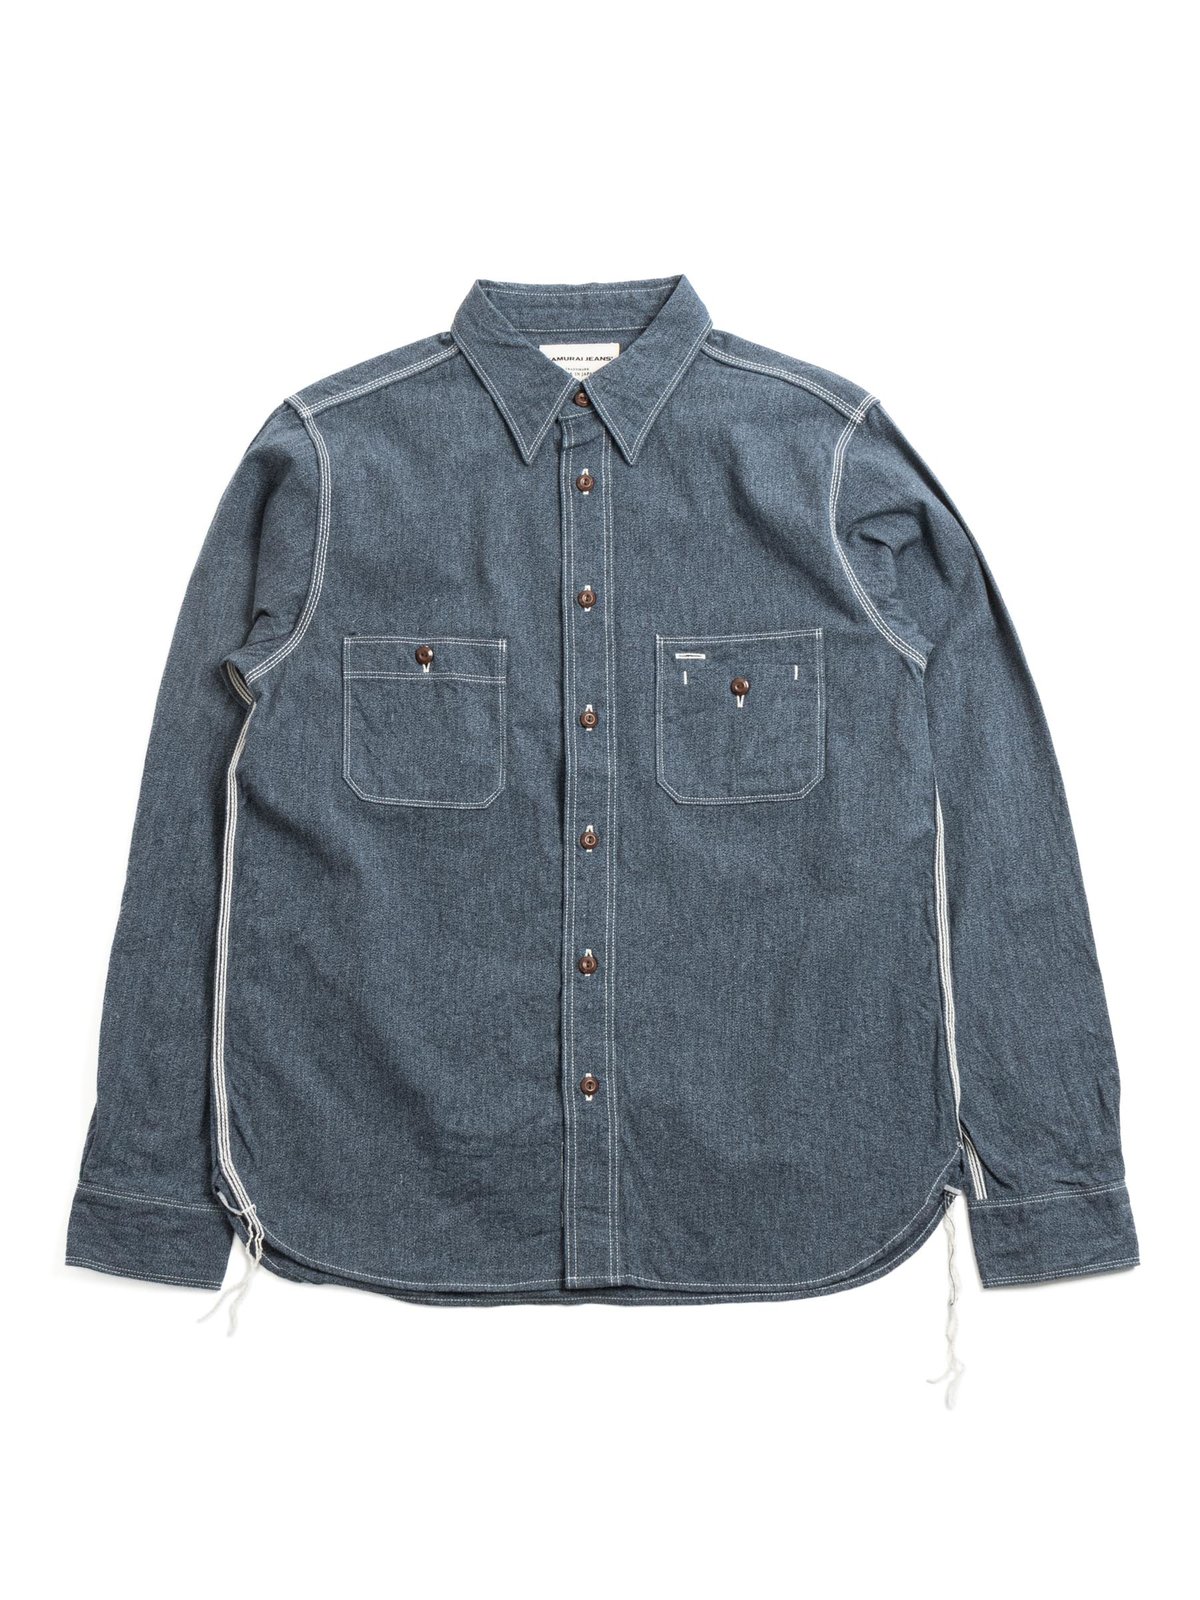 SJCBS23 TWISTED HEATHER SELVEDGE CHAMBRAY NAVY - Image 1